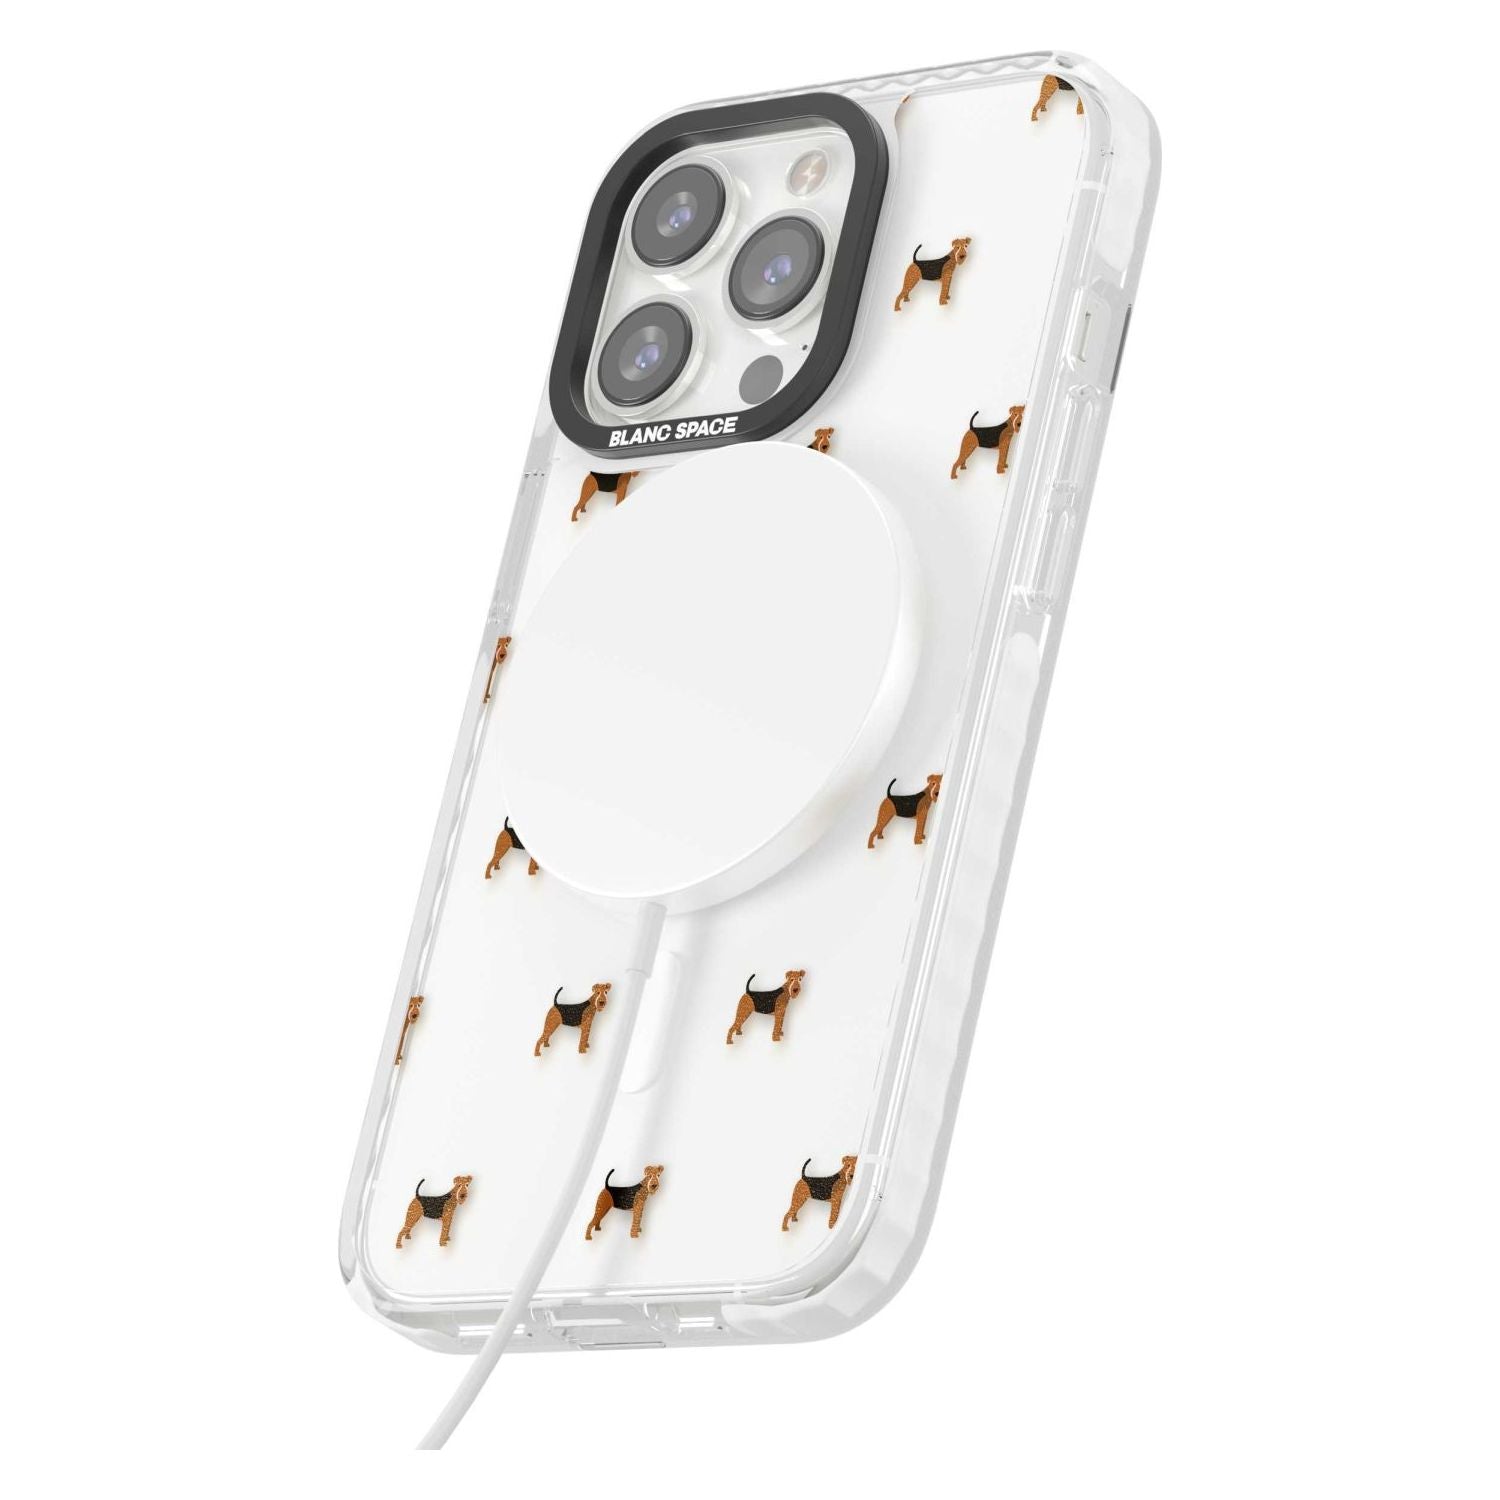 Airedale Terrier Dog Pattern Clear Phone Case iPhone 15 Pro Max / Black Impact Case,iPhone 15 Plus / Black Impact Case,iPhone 15 Pro / Black Impact Case,iPhone 15 / Black Impact Case,iPhone 15 Pro Max / Impact Case,iPhone 15 Plus / Impact Case,iPhone 15 Pro / Impact Case,iPhone 15 / Impact Case,iPhone 15 Pro Max / Magsafe Black Impact Case,iPhone 15 Plus / Magsafe Black Impact Case,iPhone 15 Pro / Magsafe Black Impact Case,iPhone 15 / Magsafe Black Impact Case,iPhone 14 Pro Max / Black Impact Case,iPhone 14